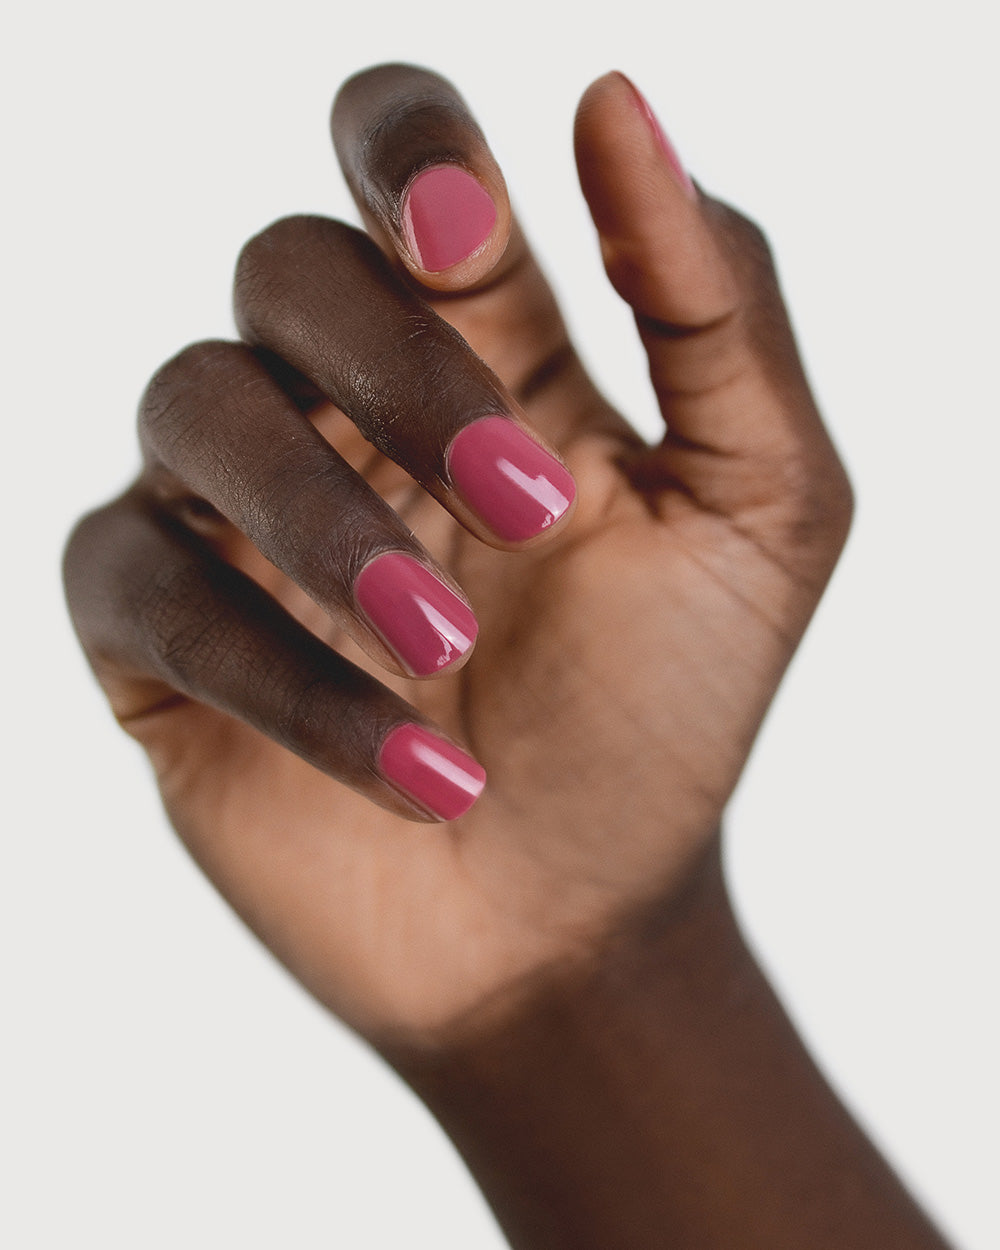 Dark Skin, Bold Nails: Creative Ideas for Your Next Manicure | Sellox Blog  | Beauty tips, African Fashion and more